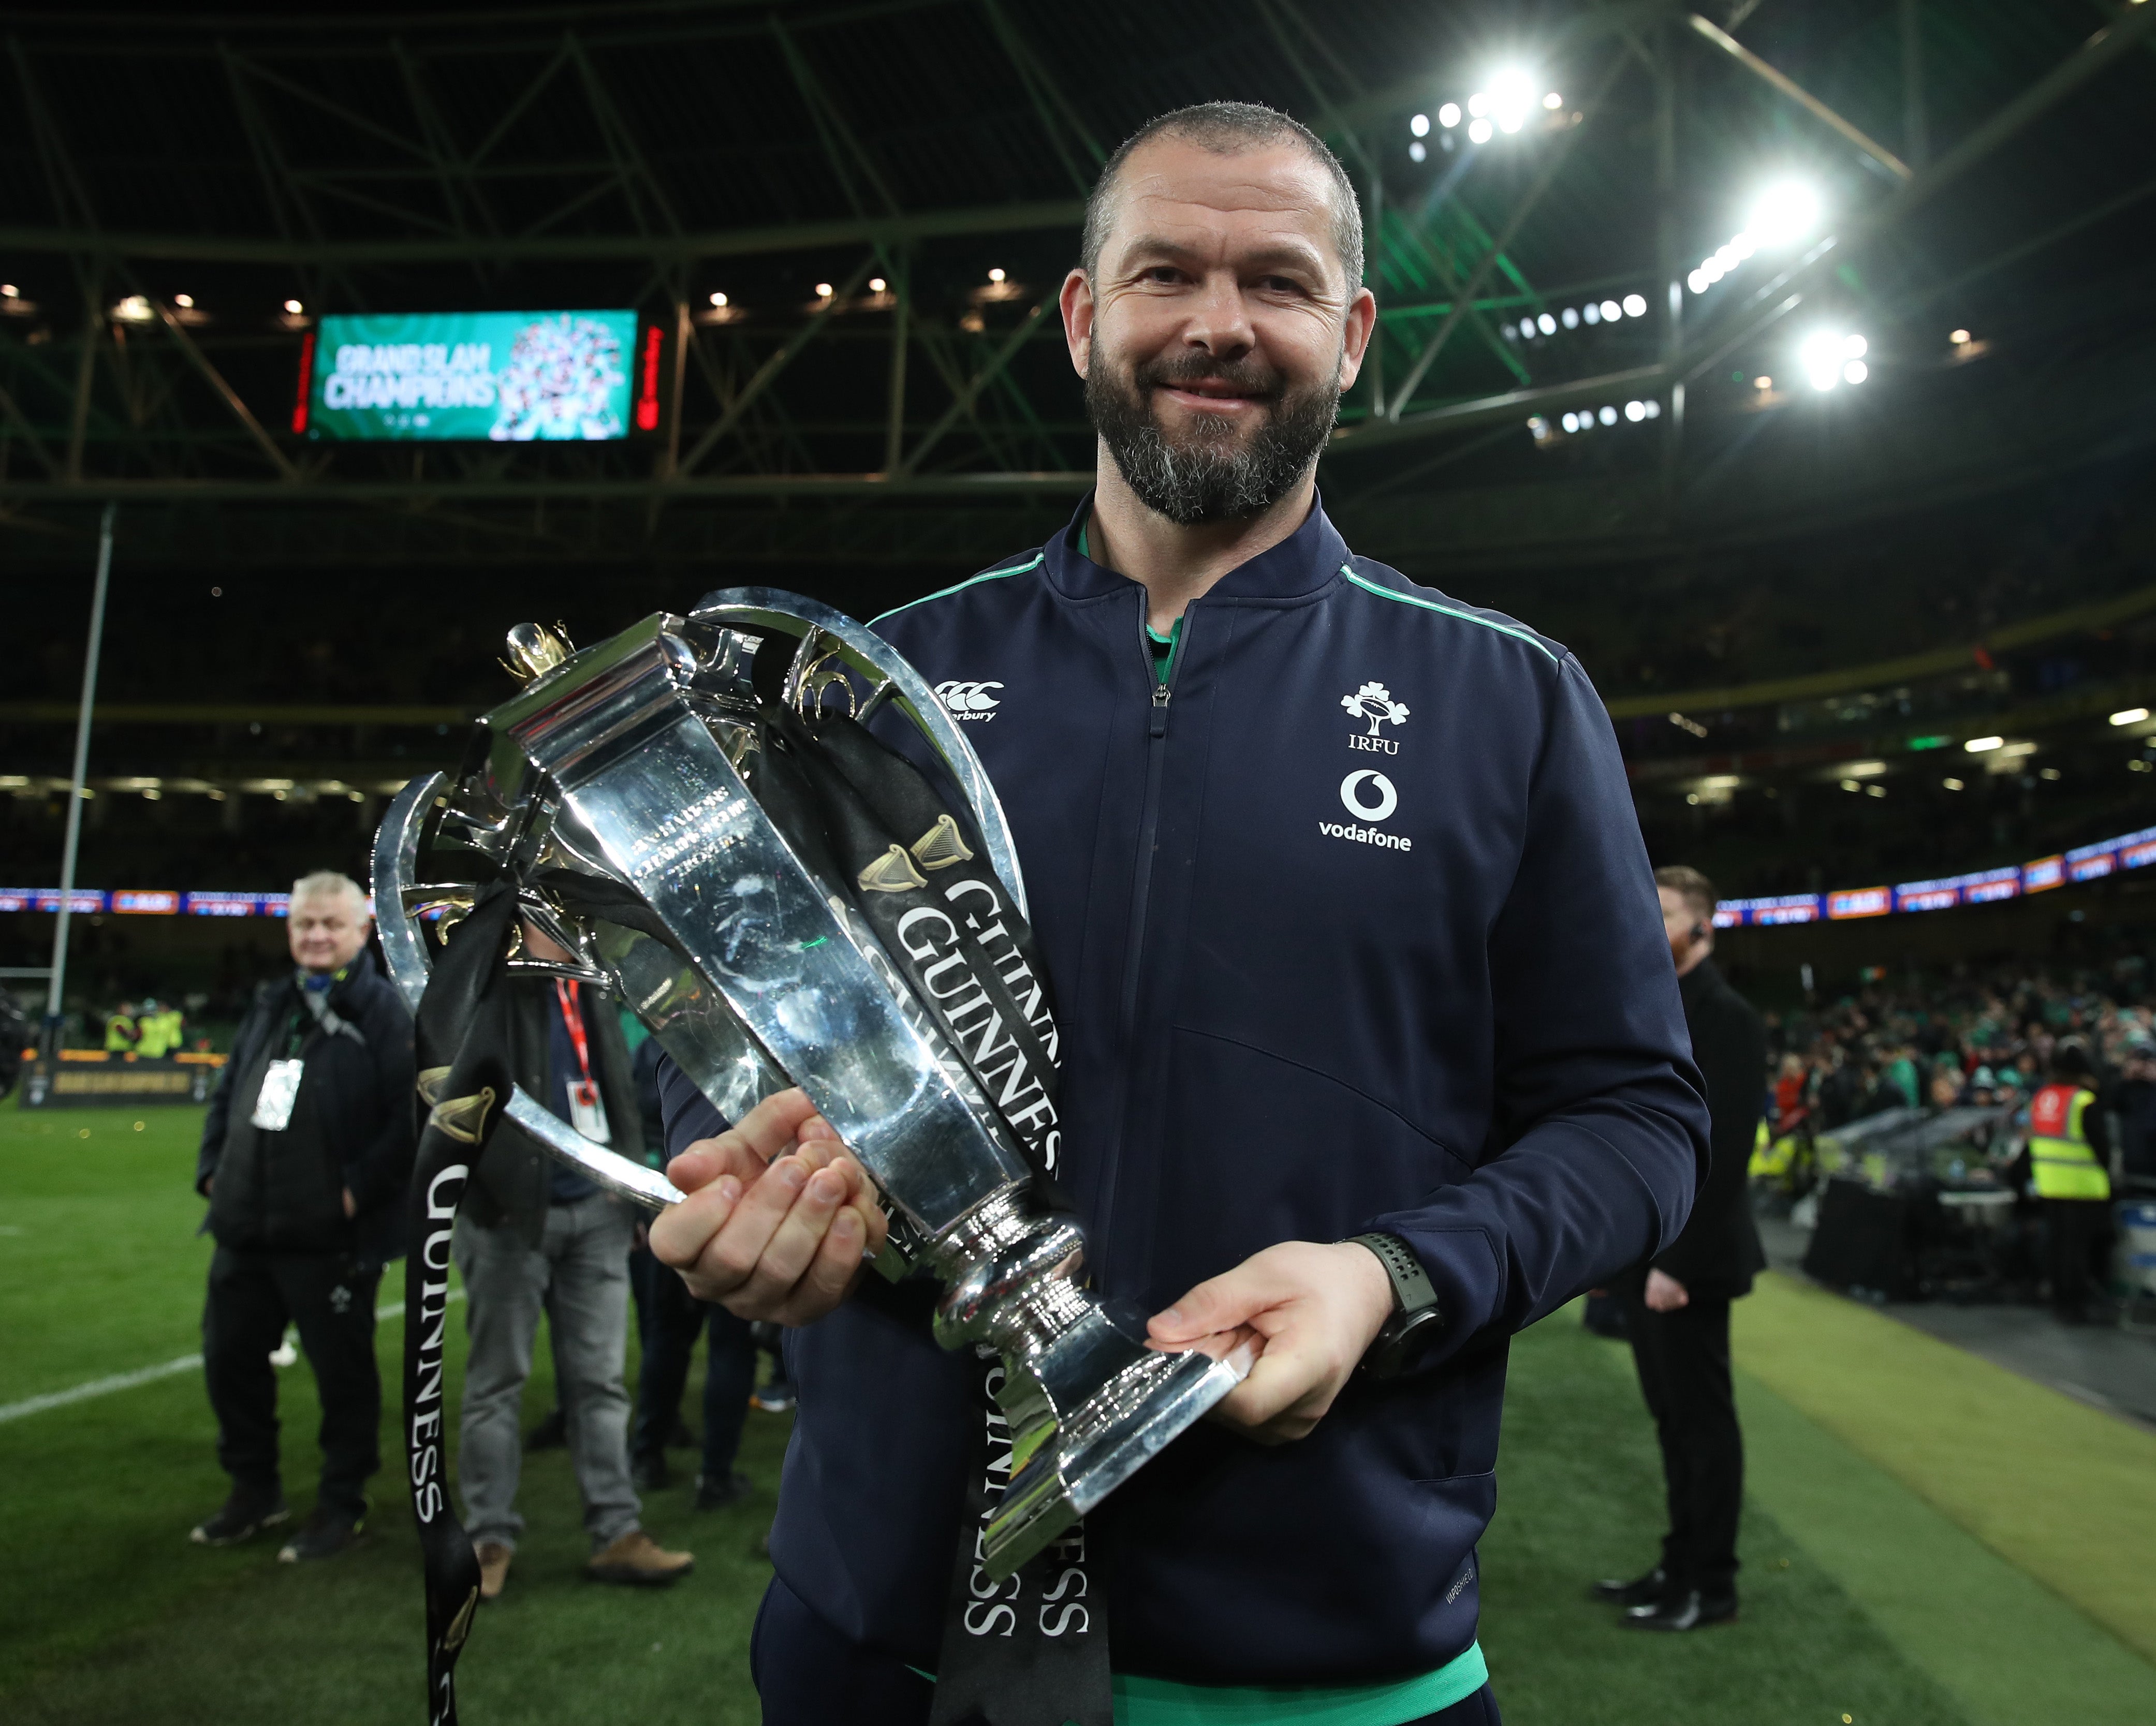 Andy Farrell guided Ireland to a Six Nations Grand Slam earlier this year